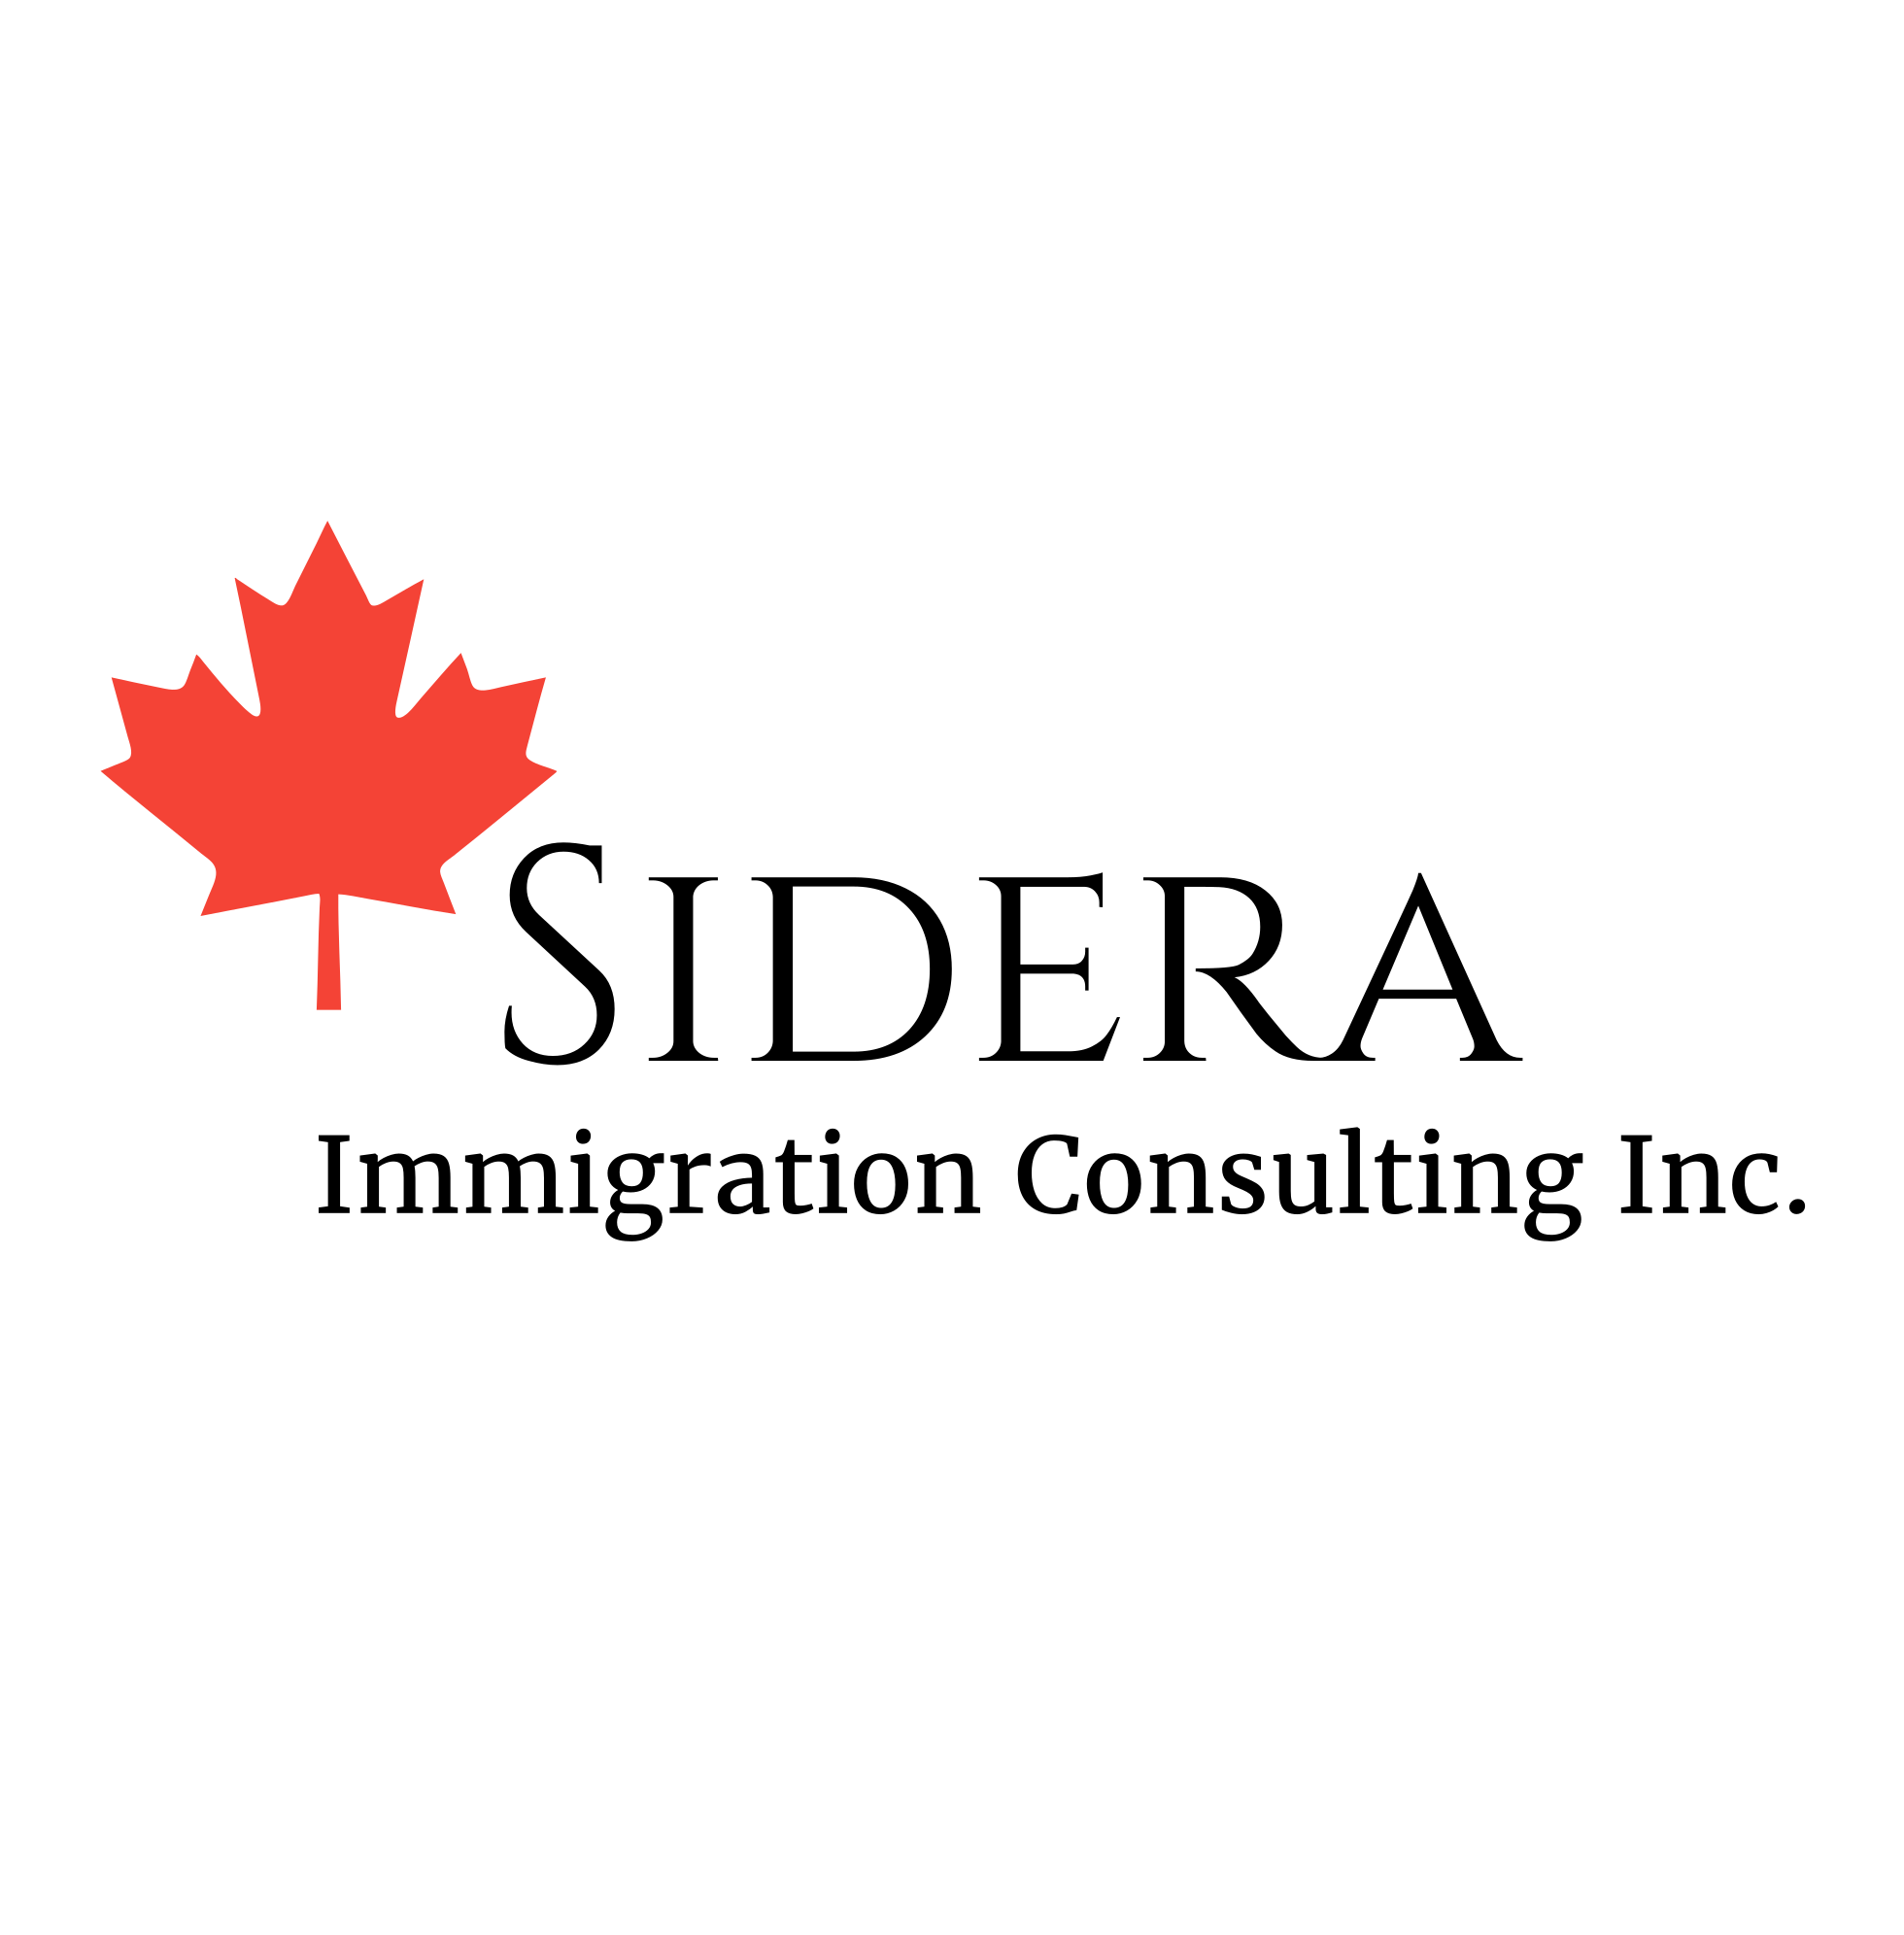 Sidera Immigration Consulting Inc